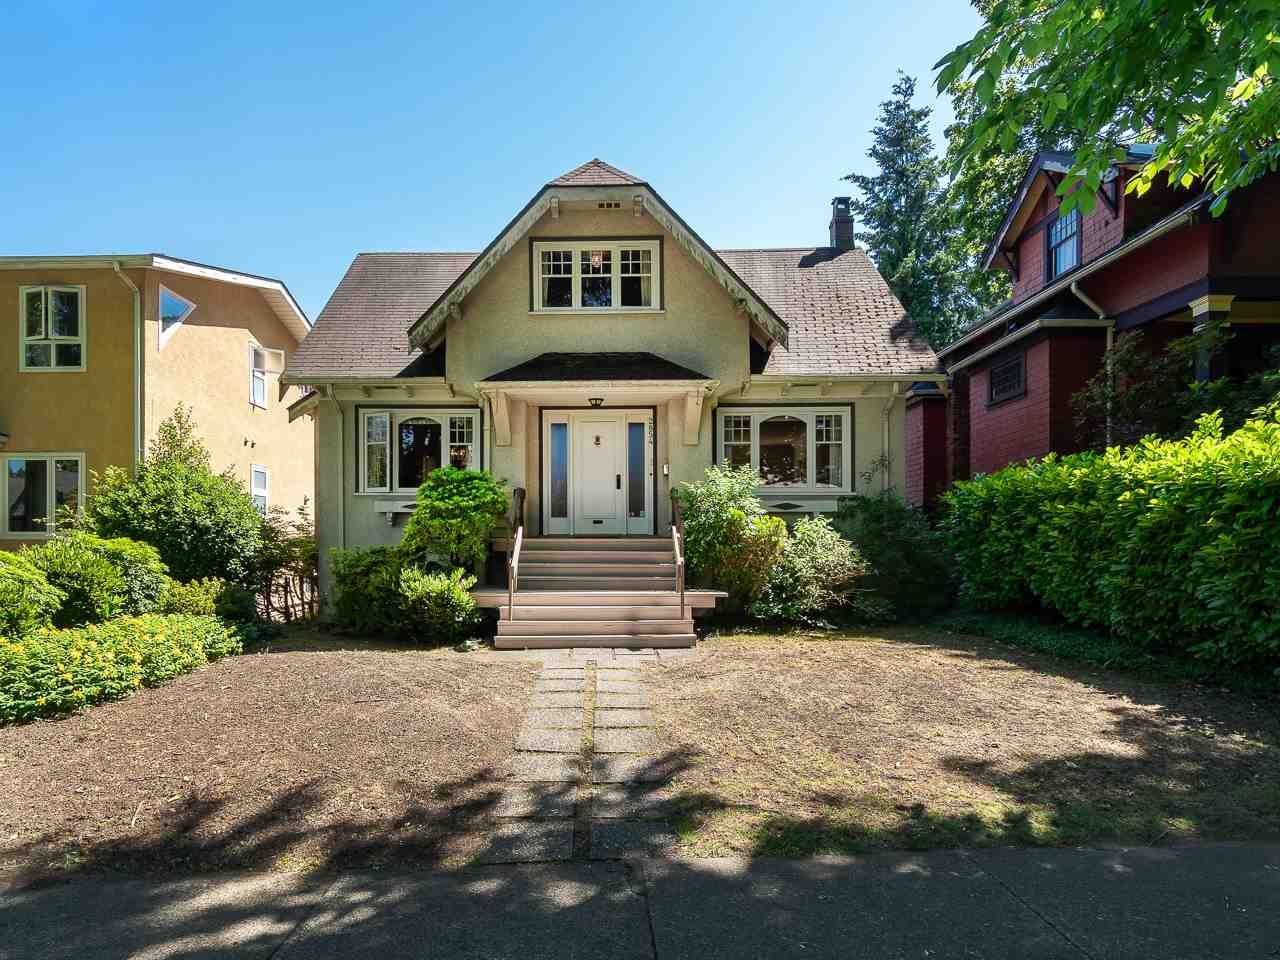 Main Photo: 2854 W 38TH AVENUE in Vancouver: Kerrisdale House for sale (Vancouver West)  : MLS®# R2282420